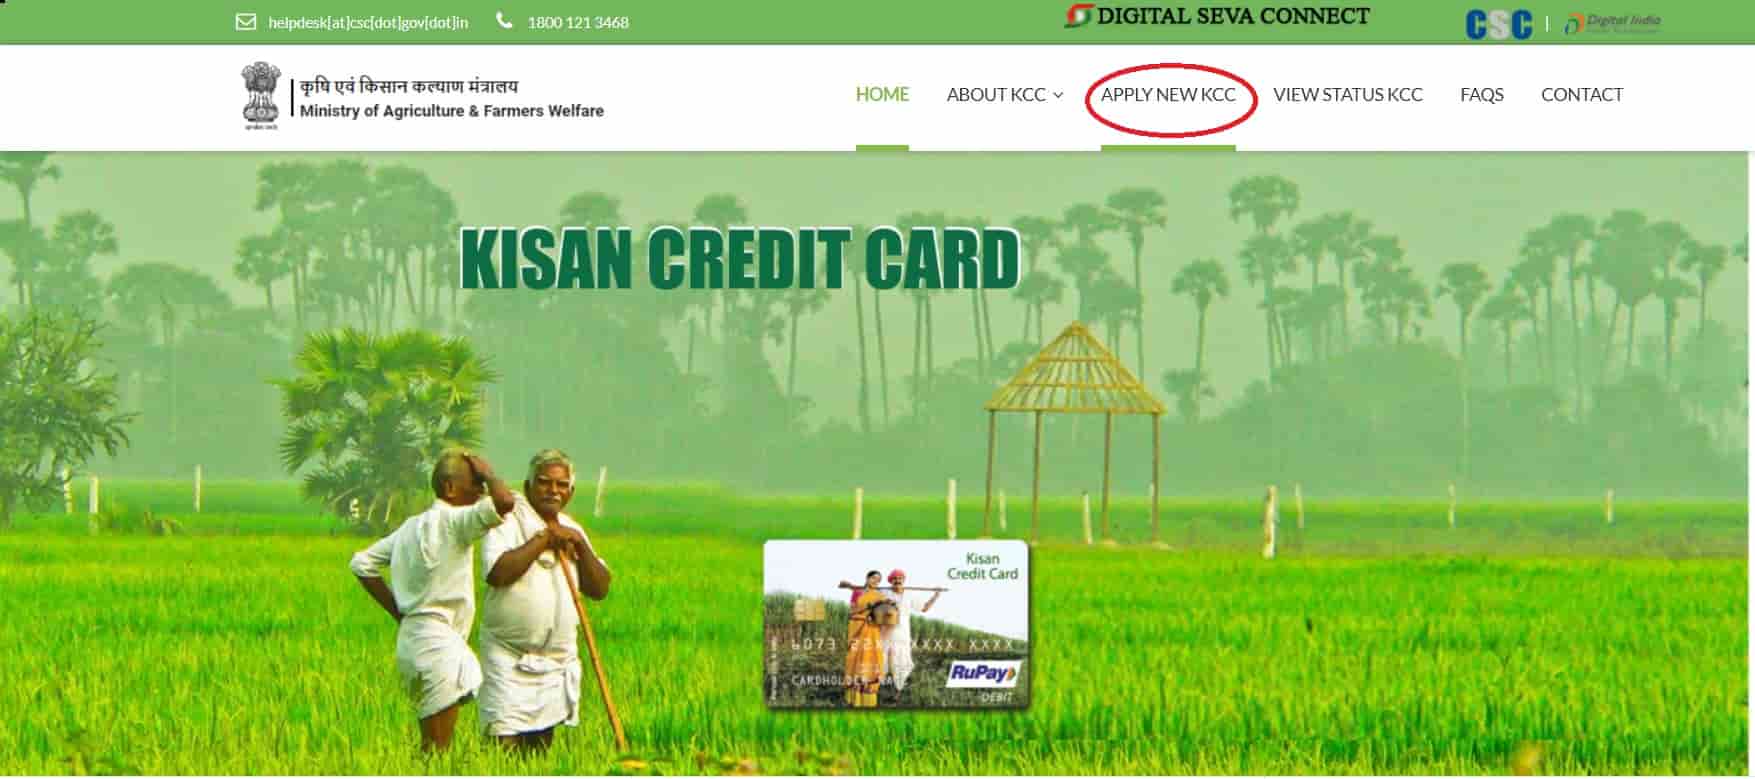 How to Apply Online for Kisan Credit Card